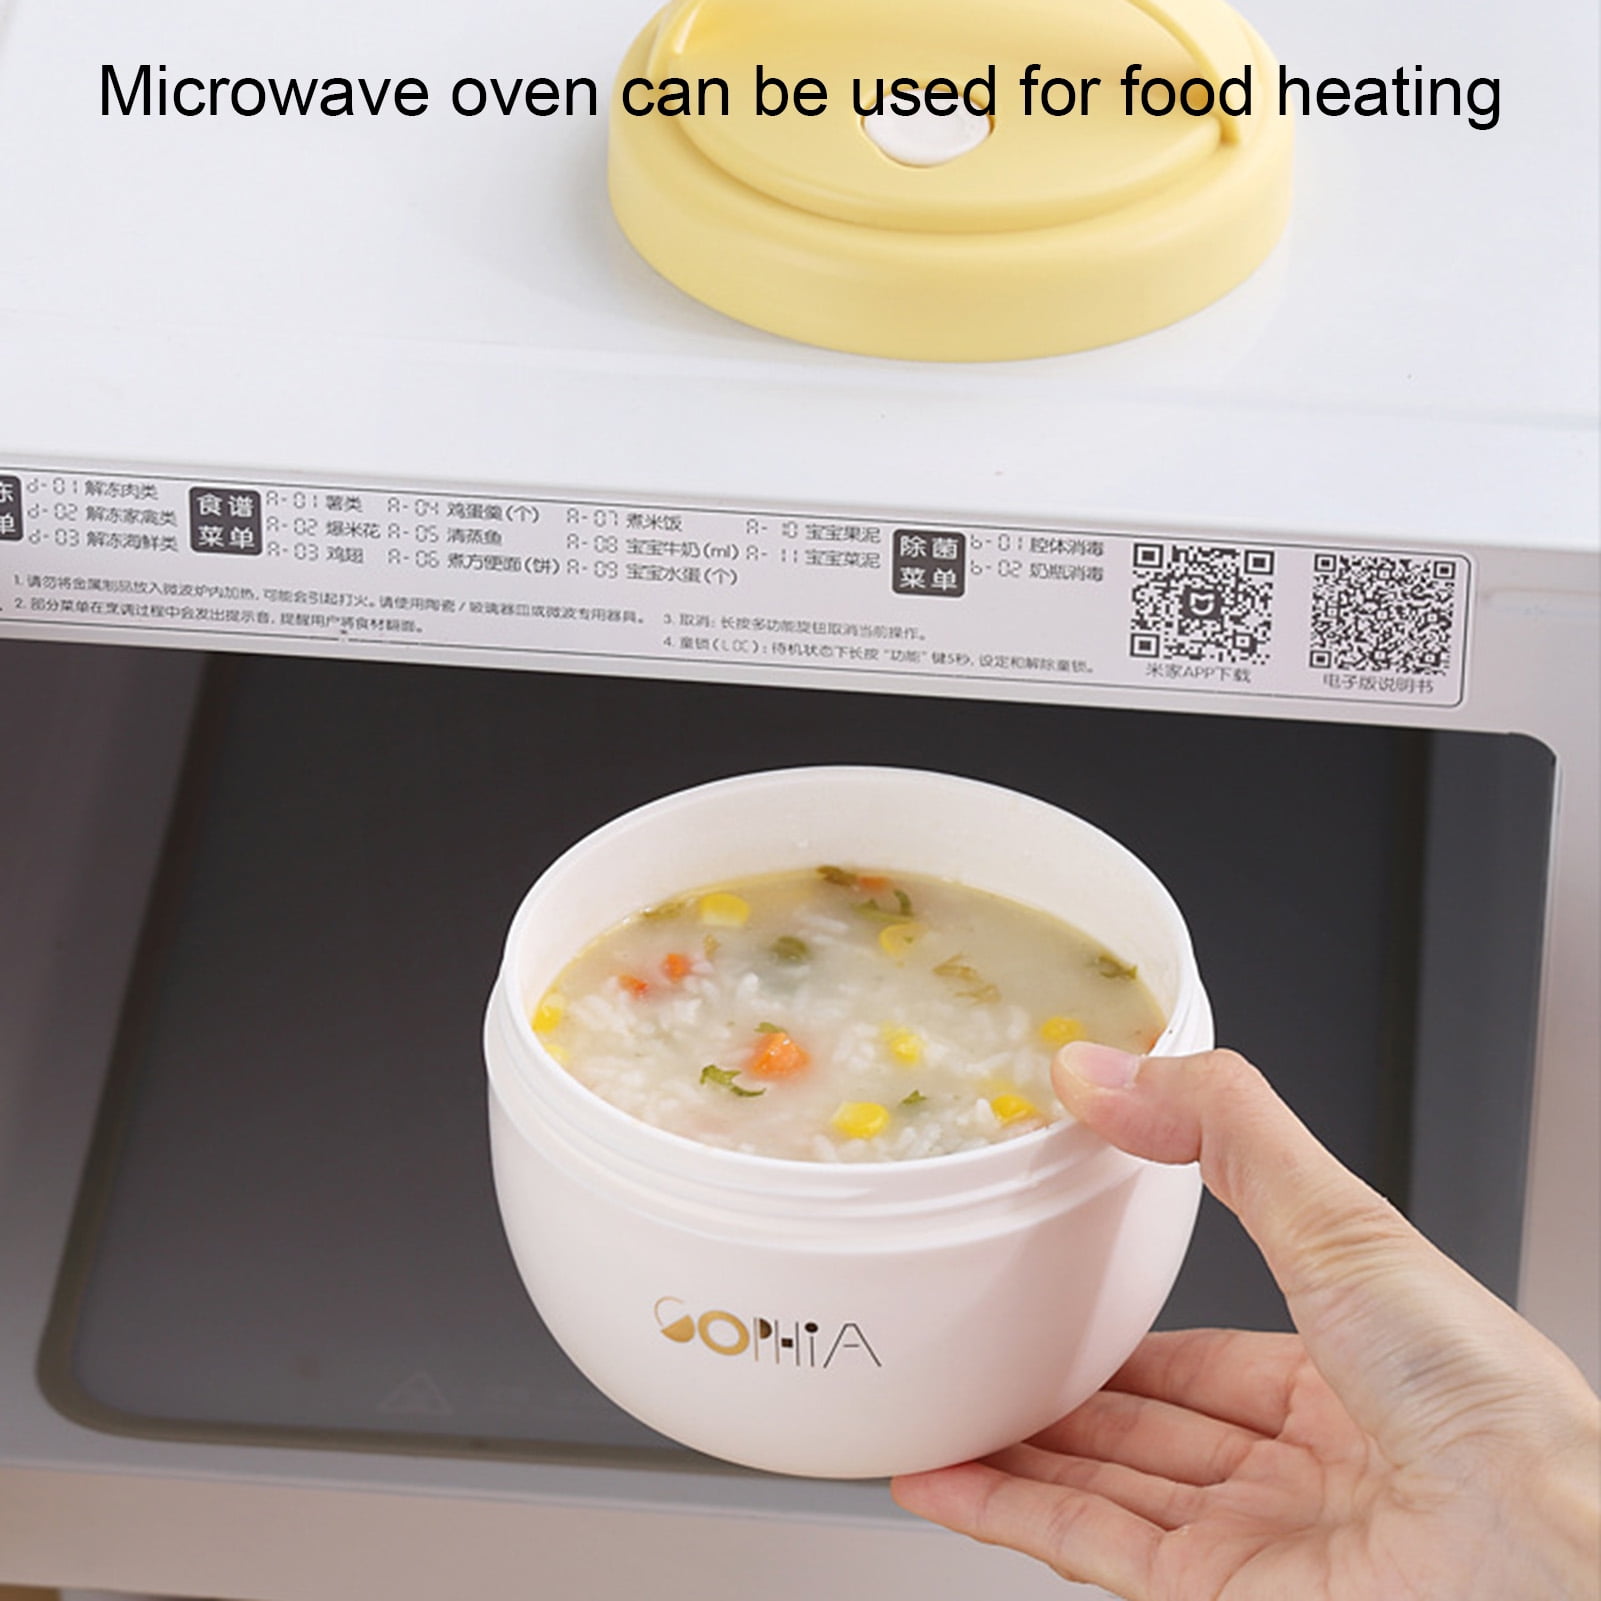 MATICAN Microwave Bowl with Lid, Microwave Soup Bowl with Lid